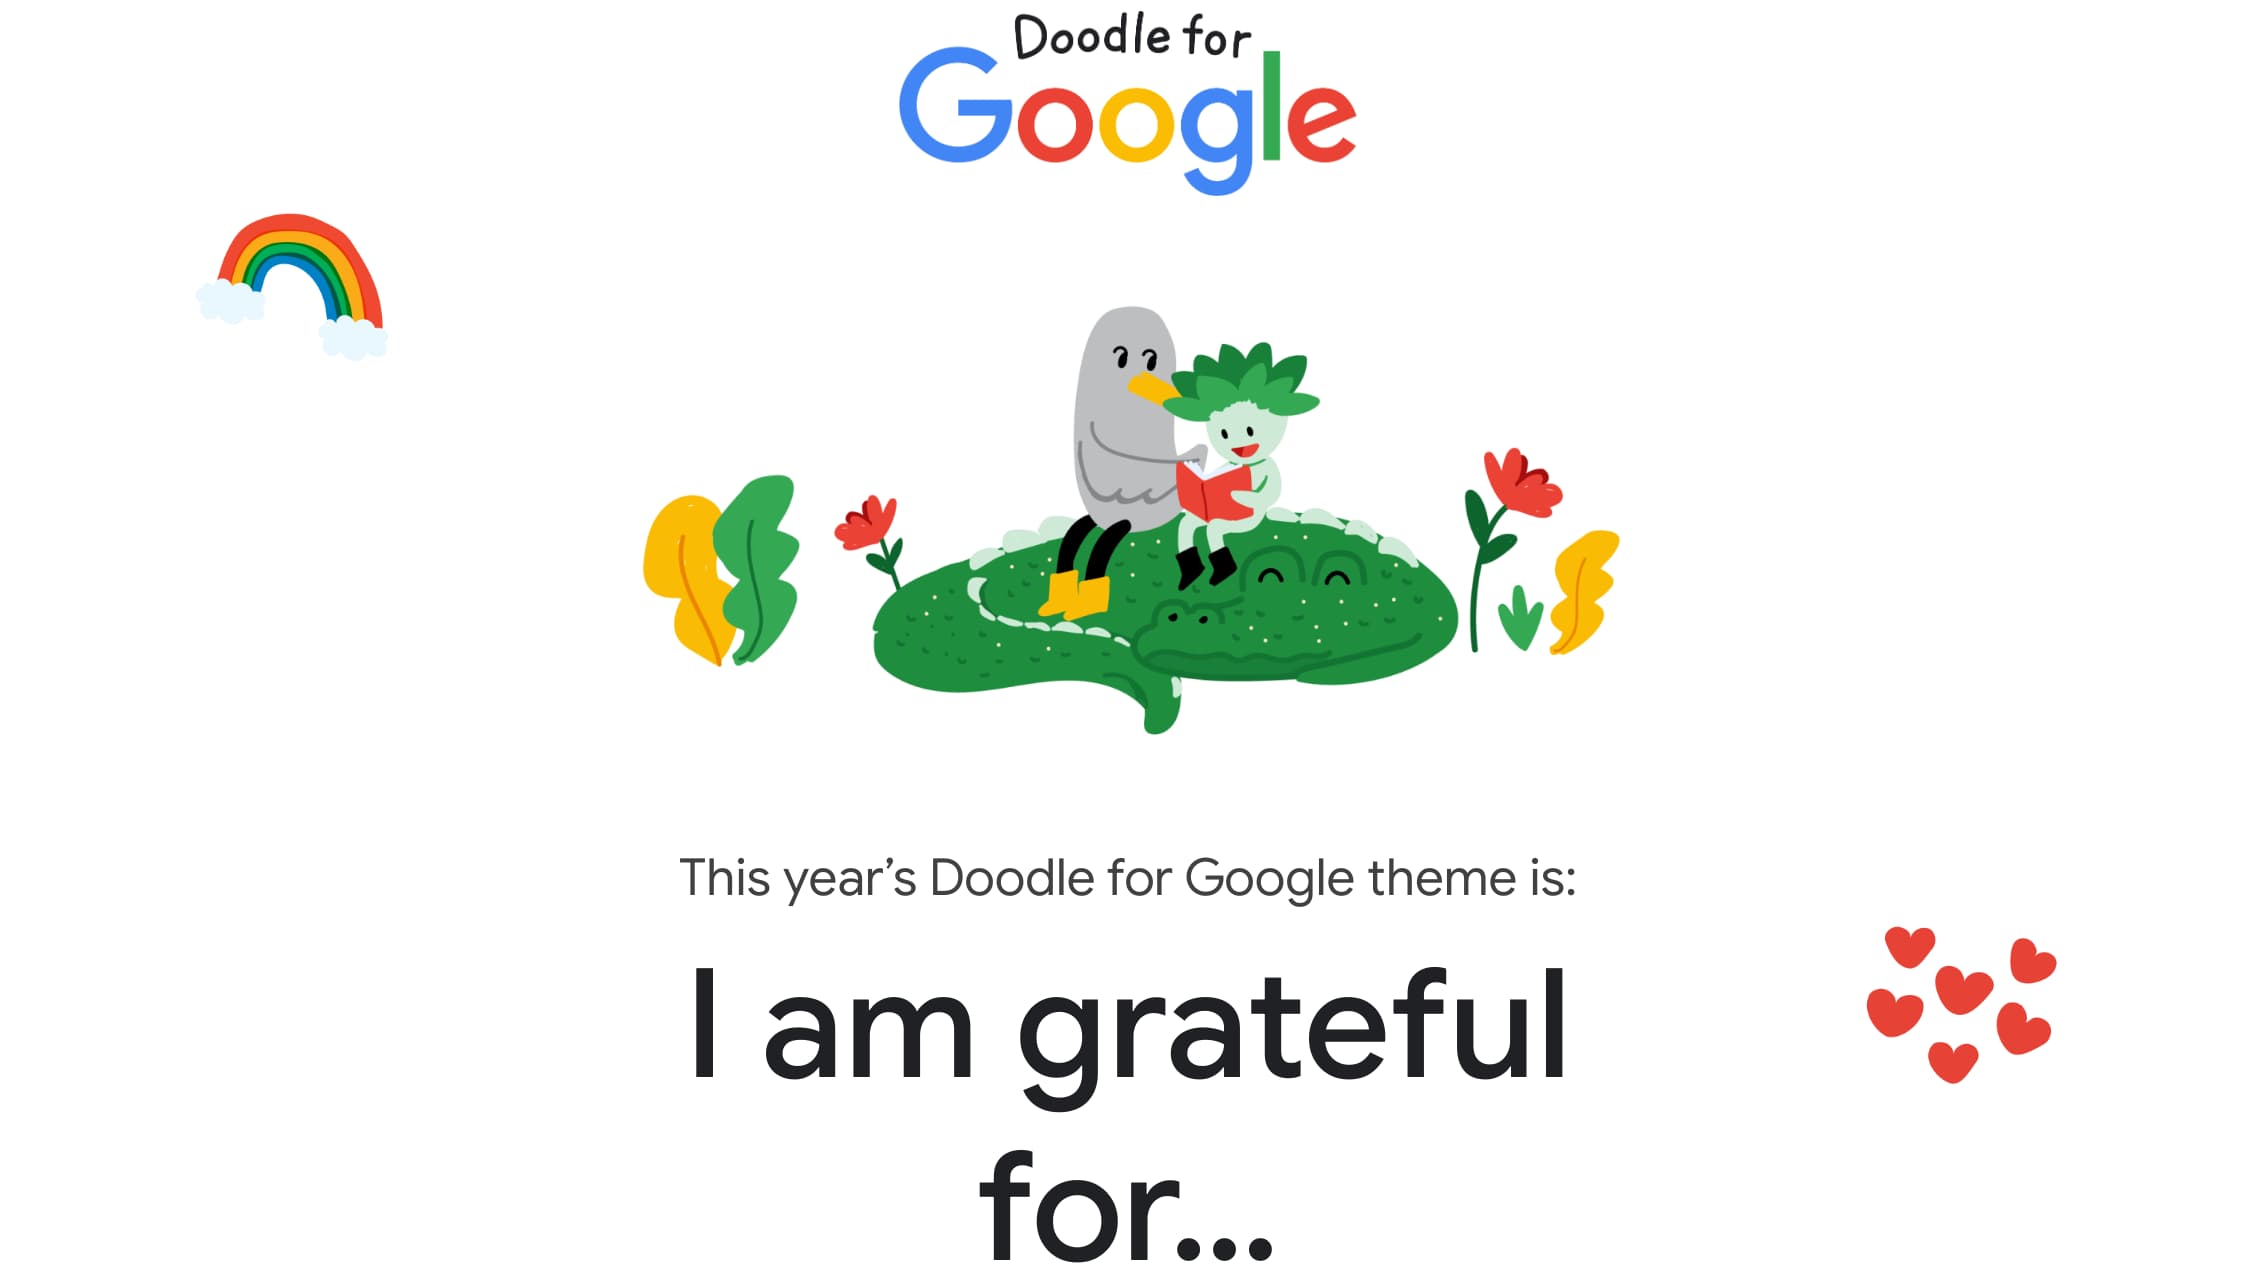 What is the 2023 doodle for Google theme?